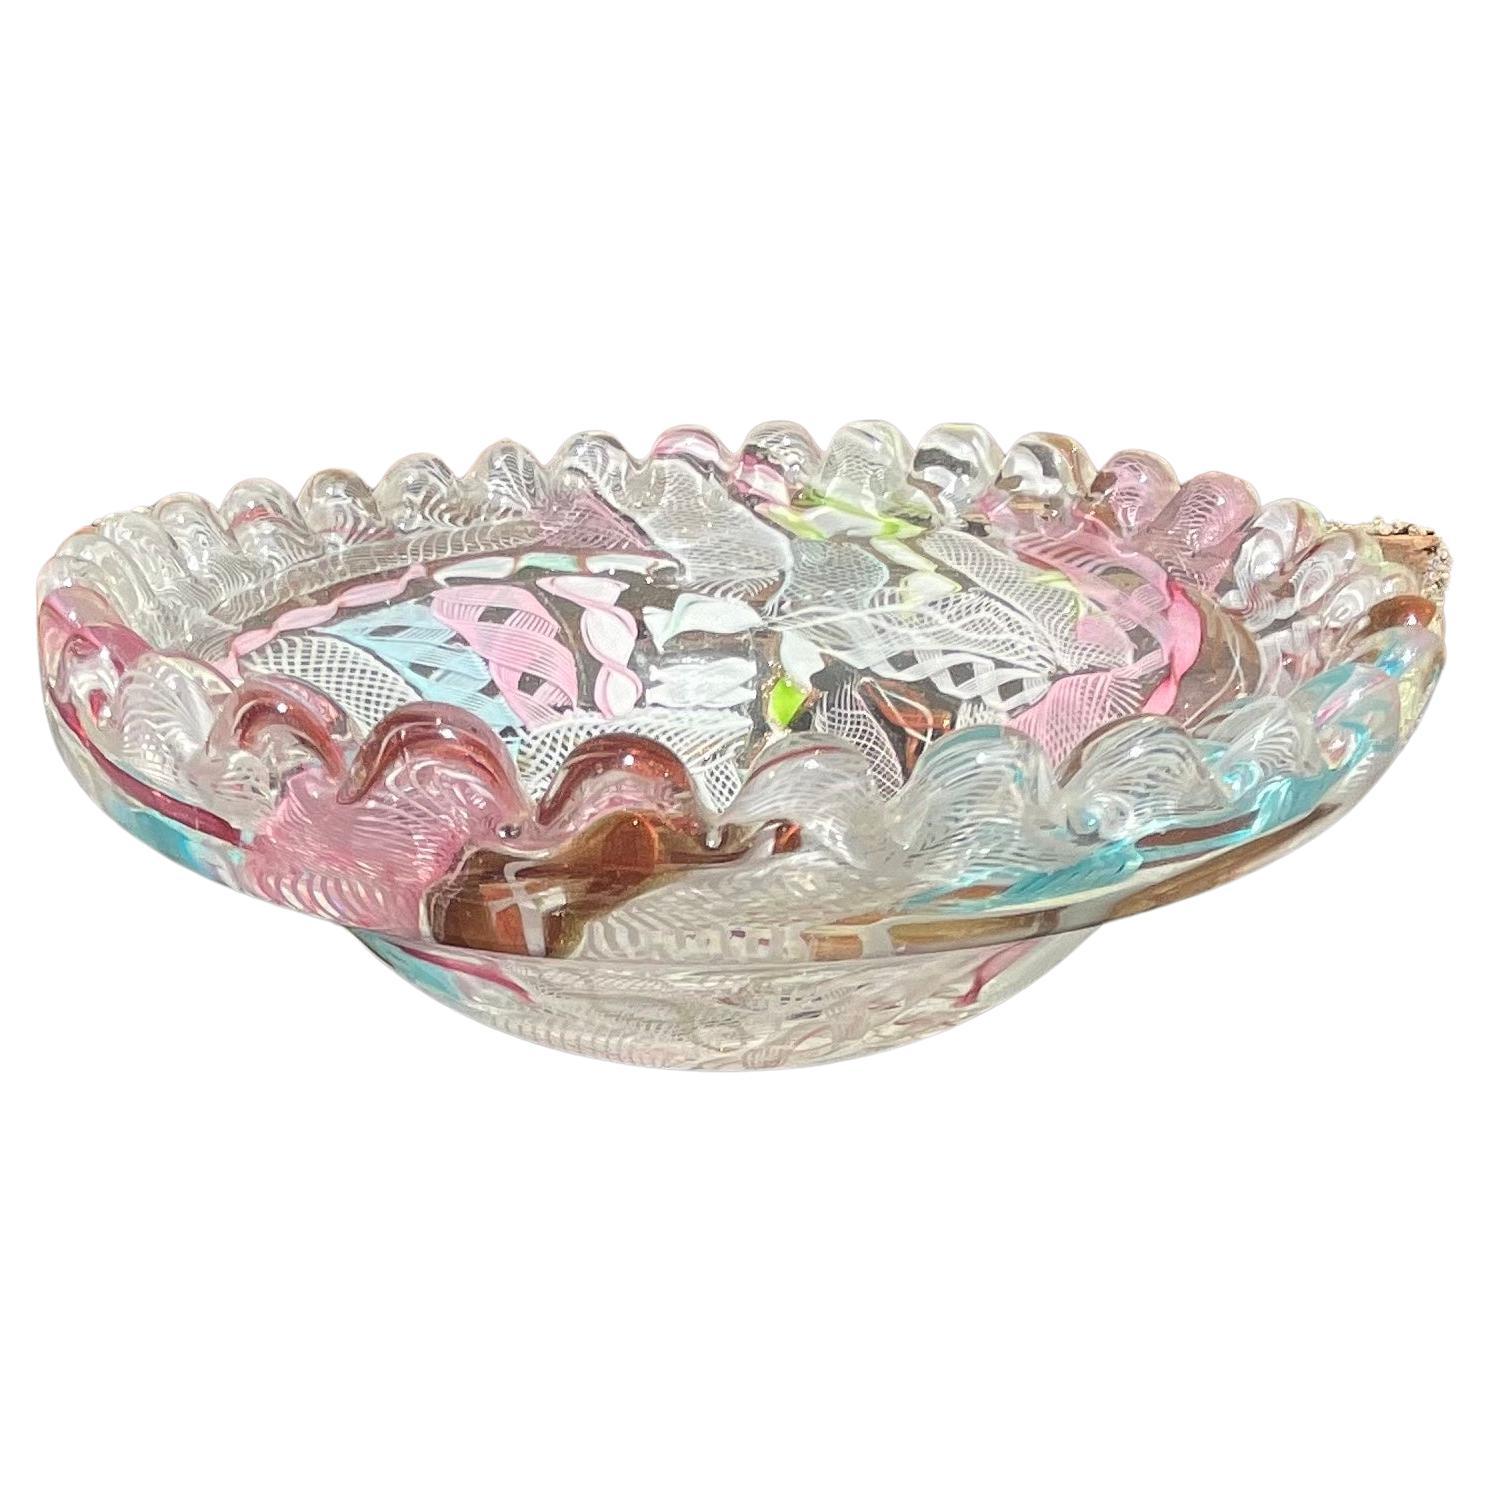 Dino Martens Aureliano Toso Attributed Murano Complicated Cane Patchwork Bowl For Sale